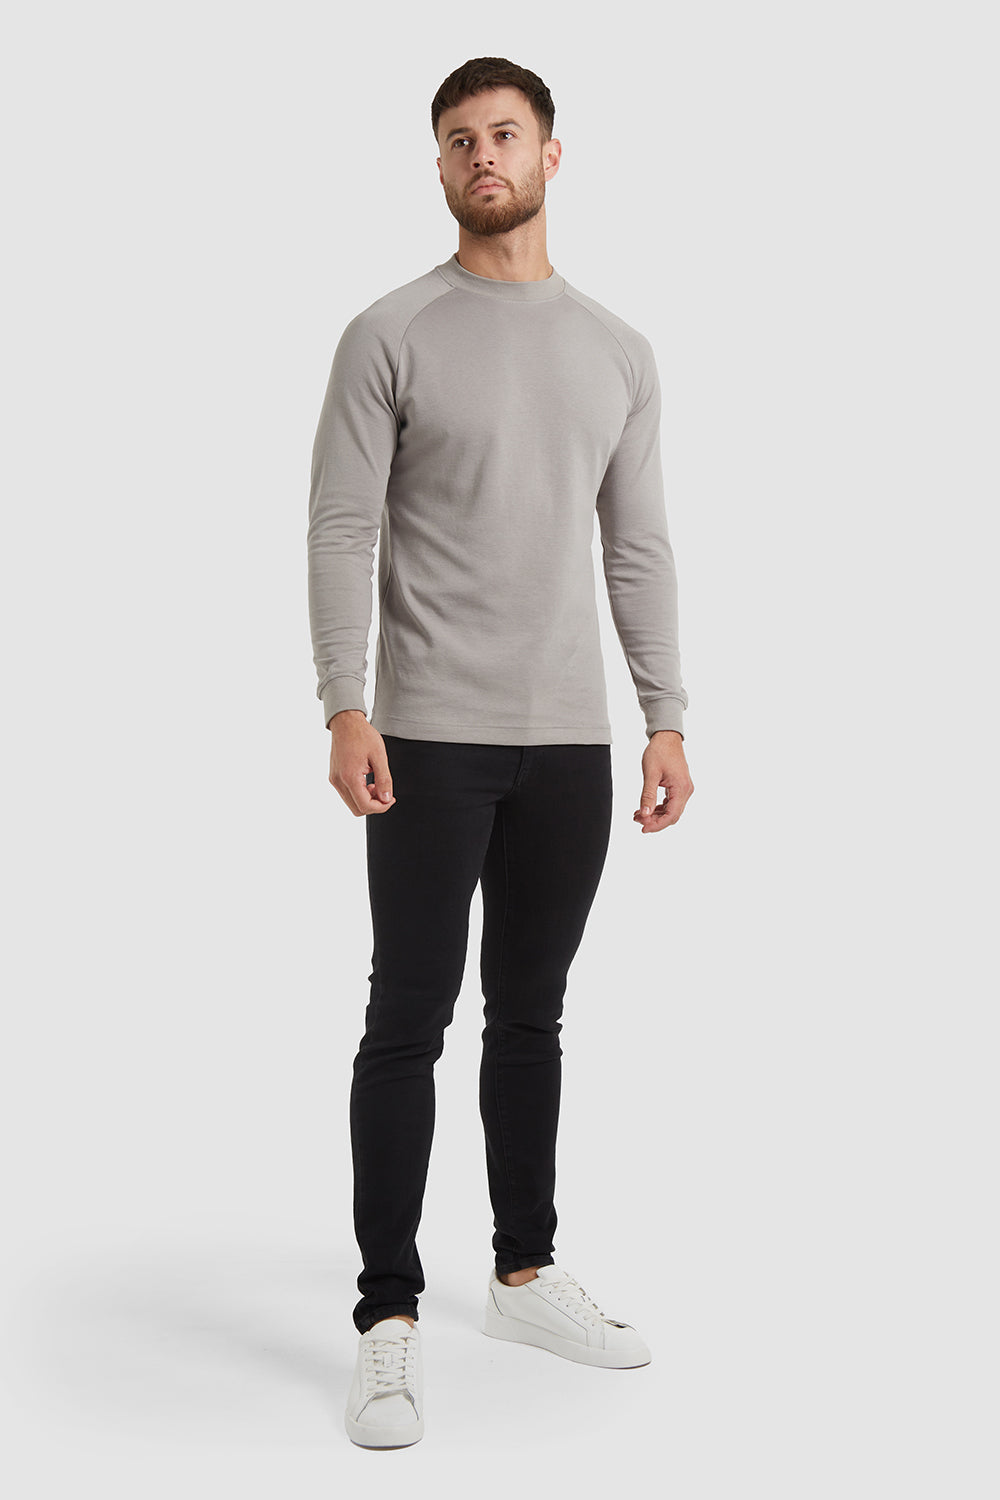 Mock Neck T-Shirt in Mink - TAILORED ATHLETE - ROW